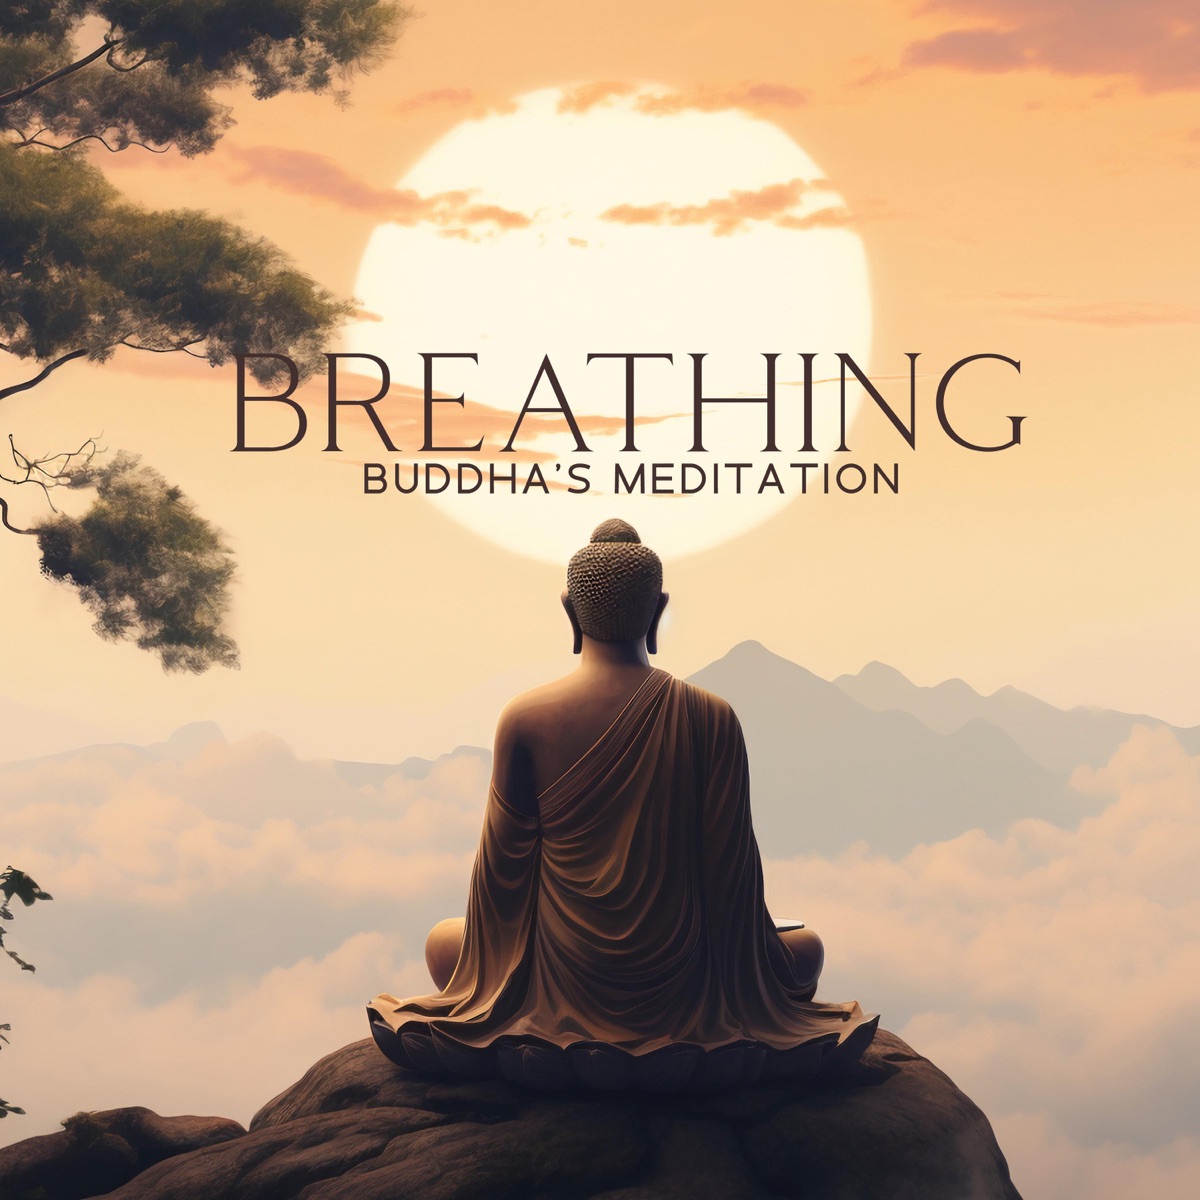 Breathing Buddha's Meditation: Mindful Music with Sounds of Singing Birds,  Slow Your Breathing & Calm Your Mind for Stress & Anxiety Relief - Album by  Serena Beatty-Anandra & Natural Healing Music Zone 